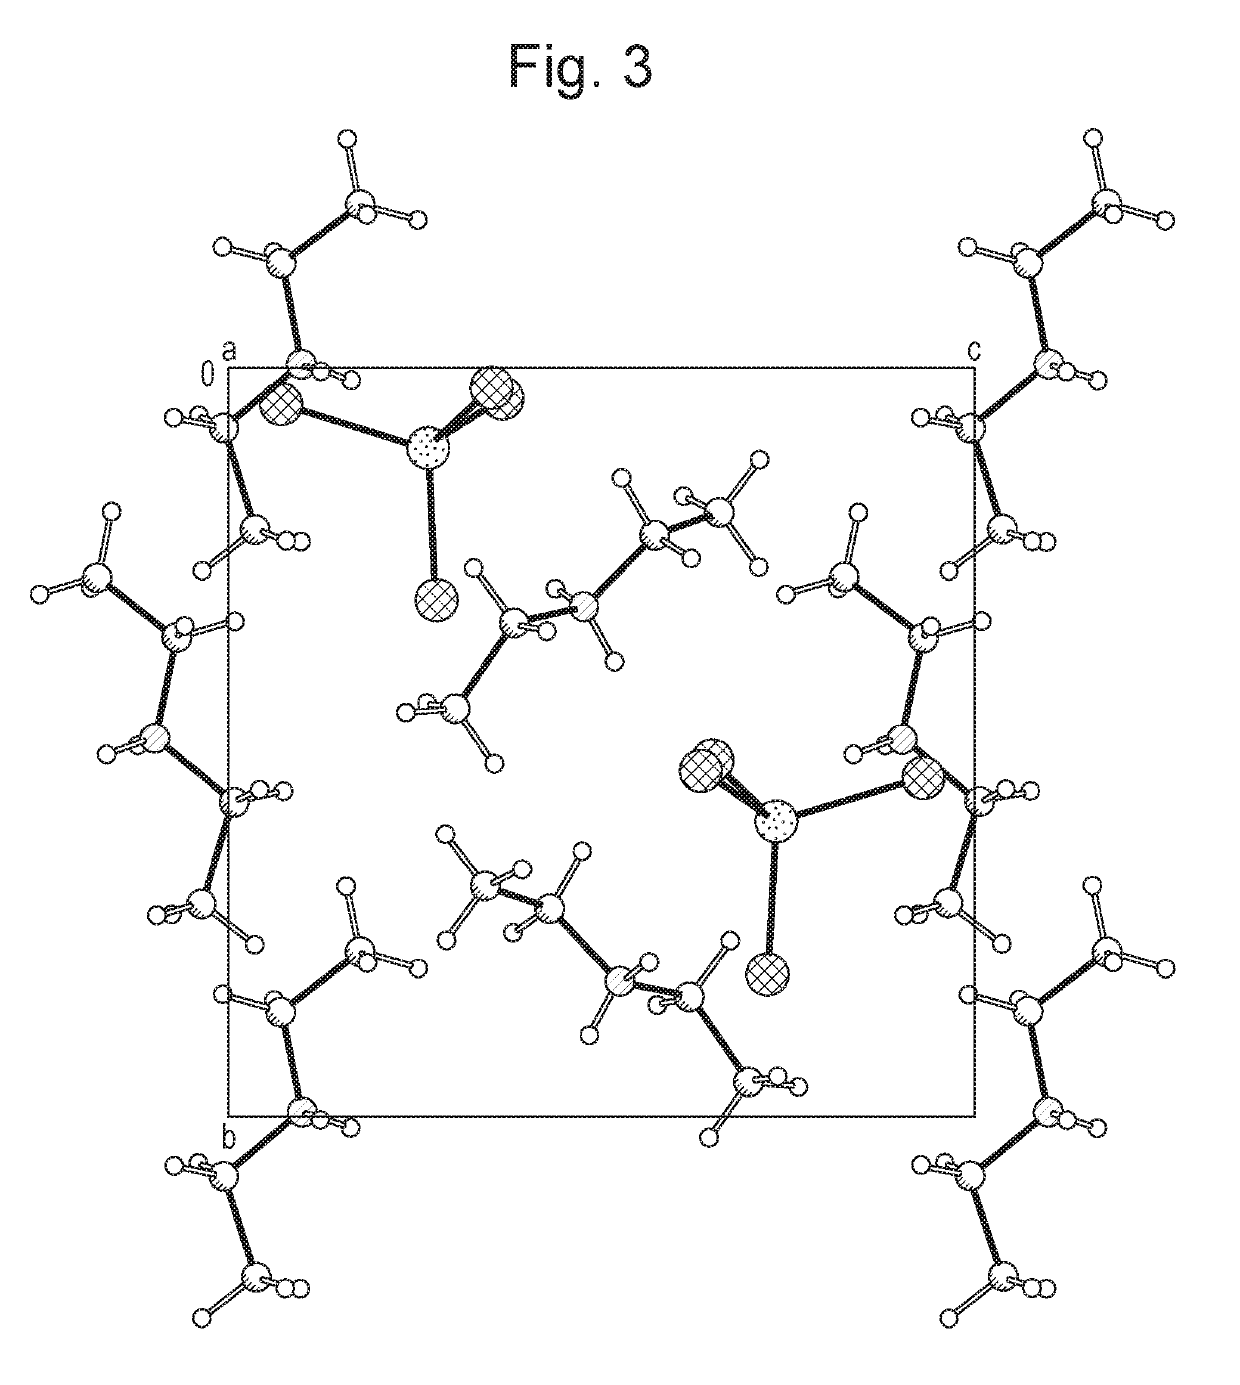 Crystalline diethylamine tetrathiomolybdate and its pharmaceutical uses